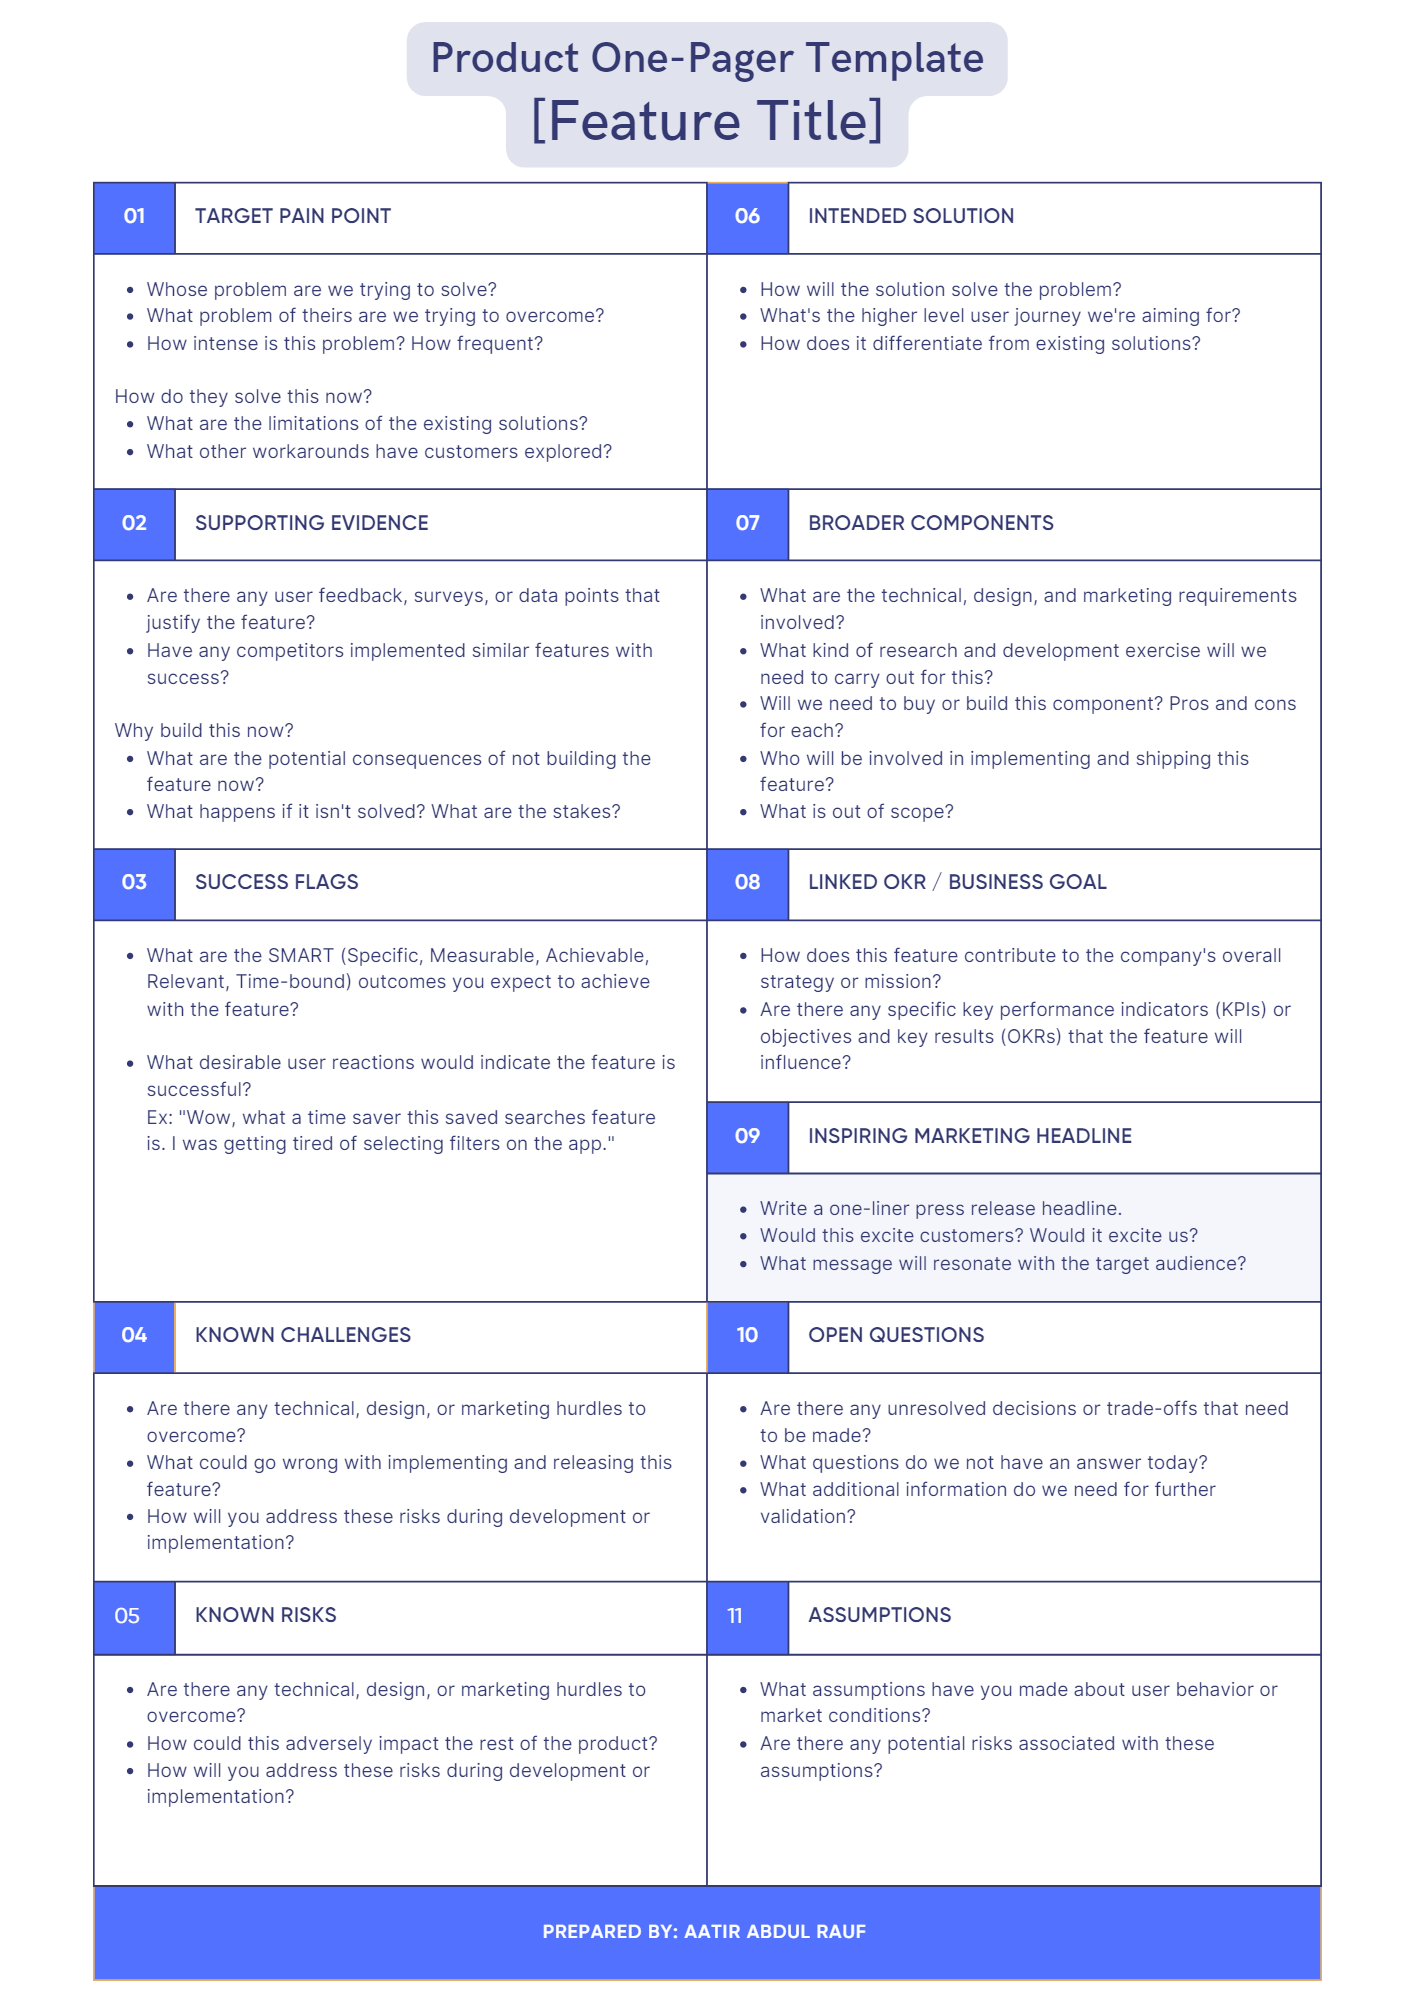 How to write a Product One Pager (w/ Examples)